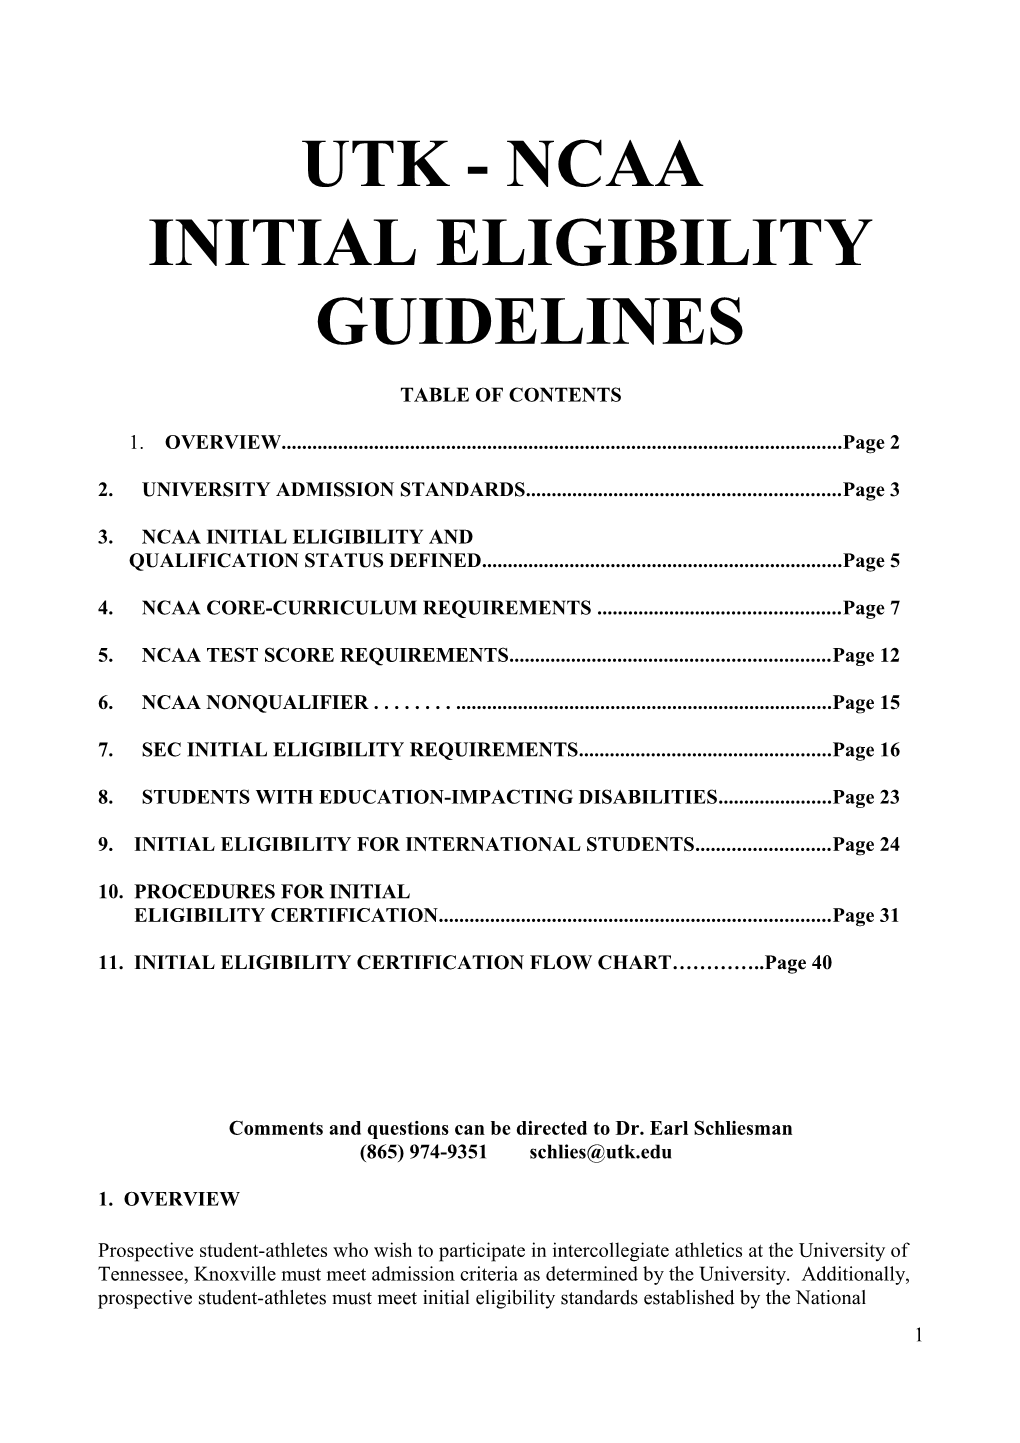 Initial Eligibility Guidelines